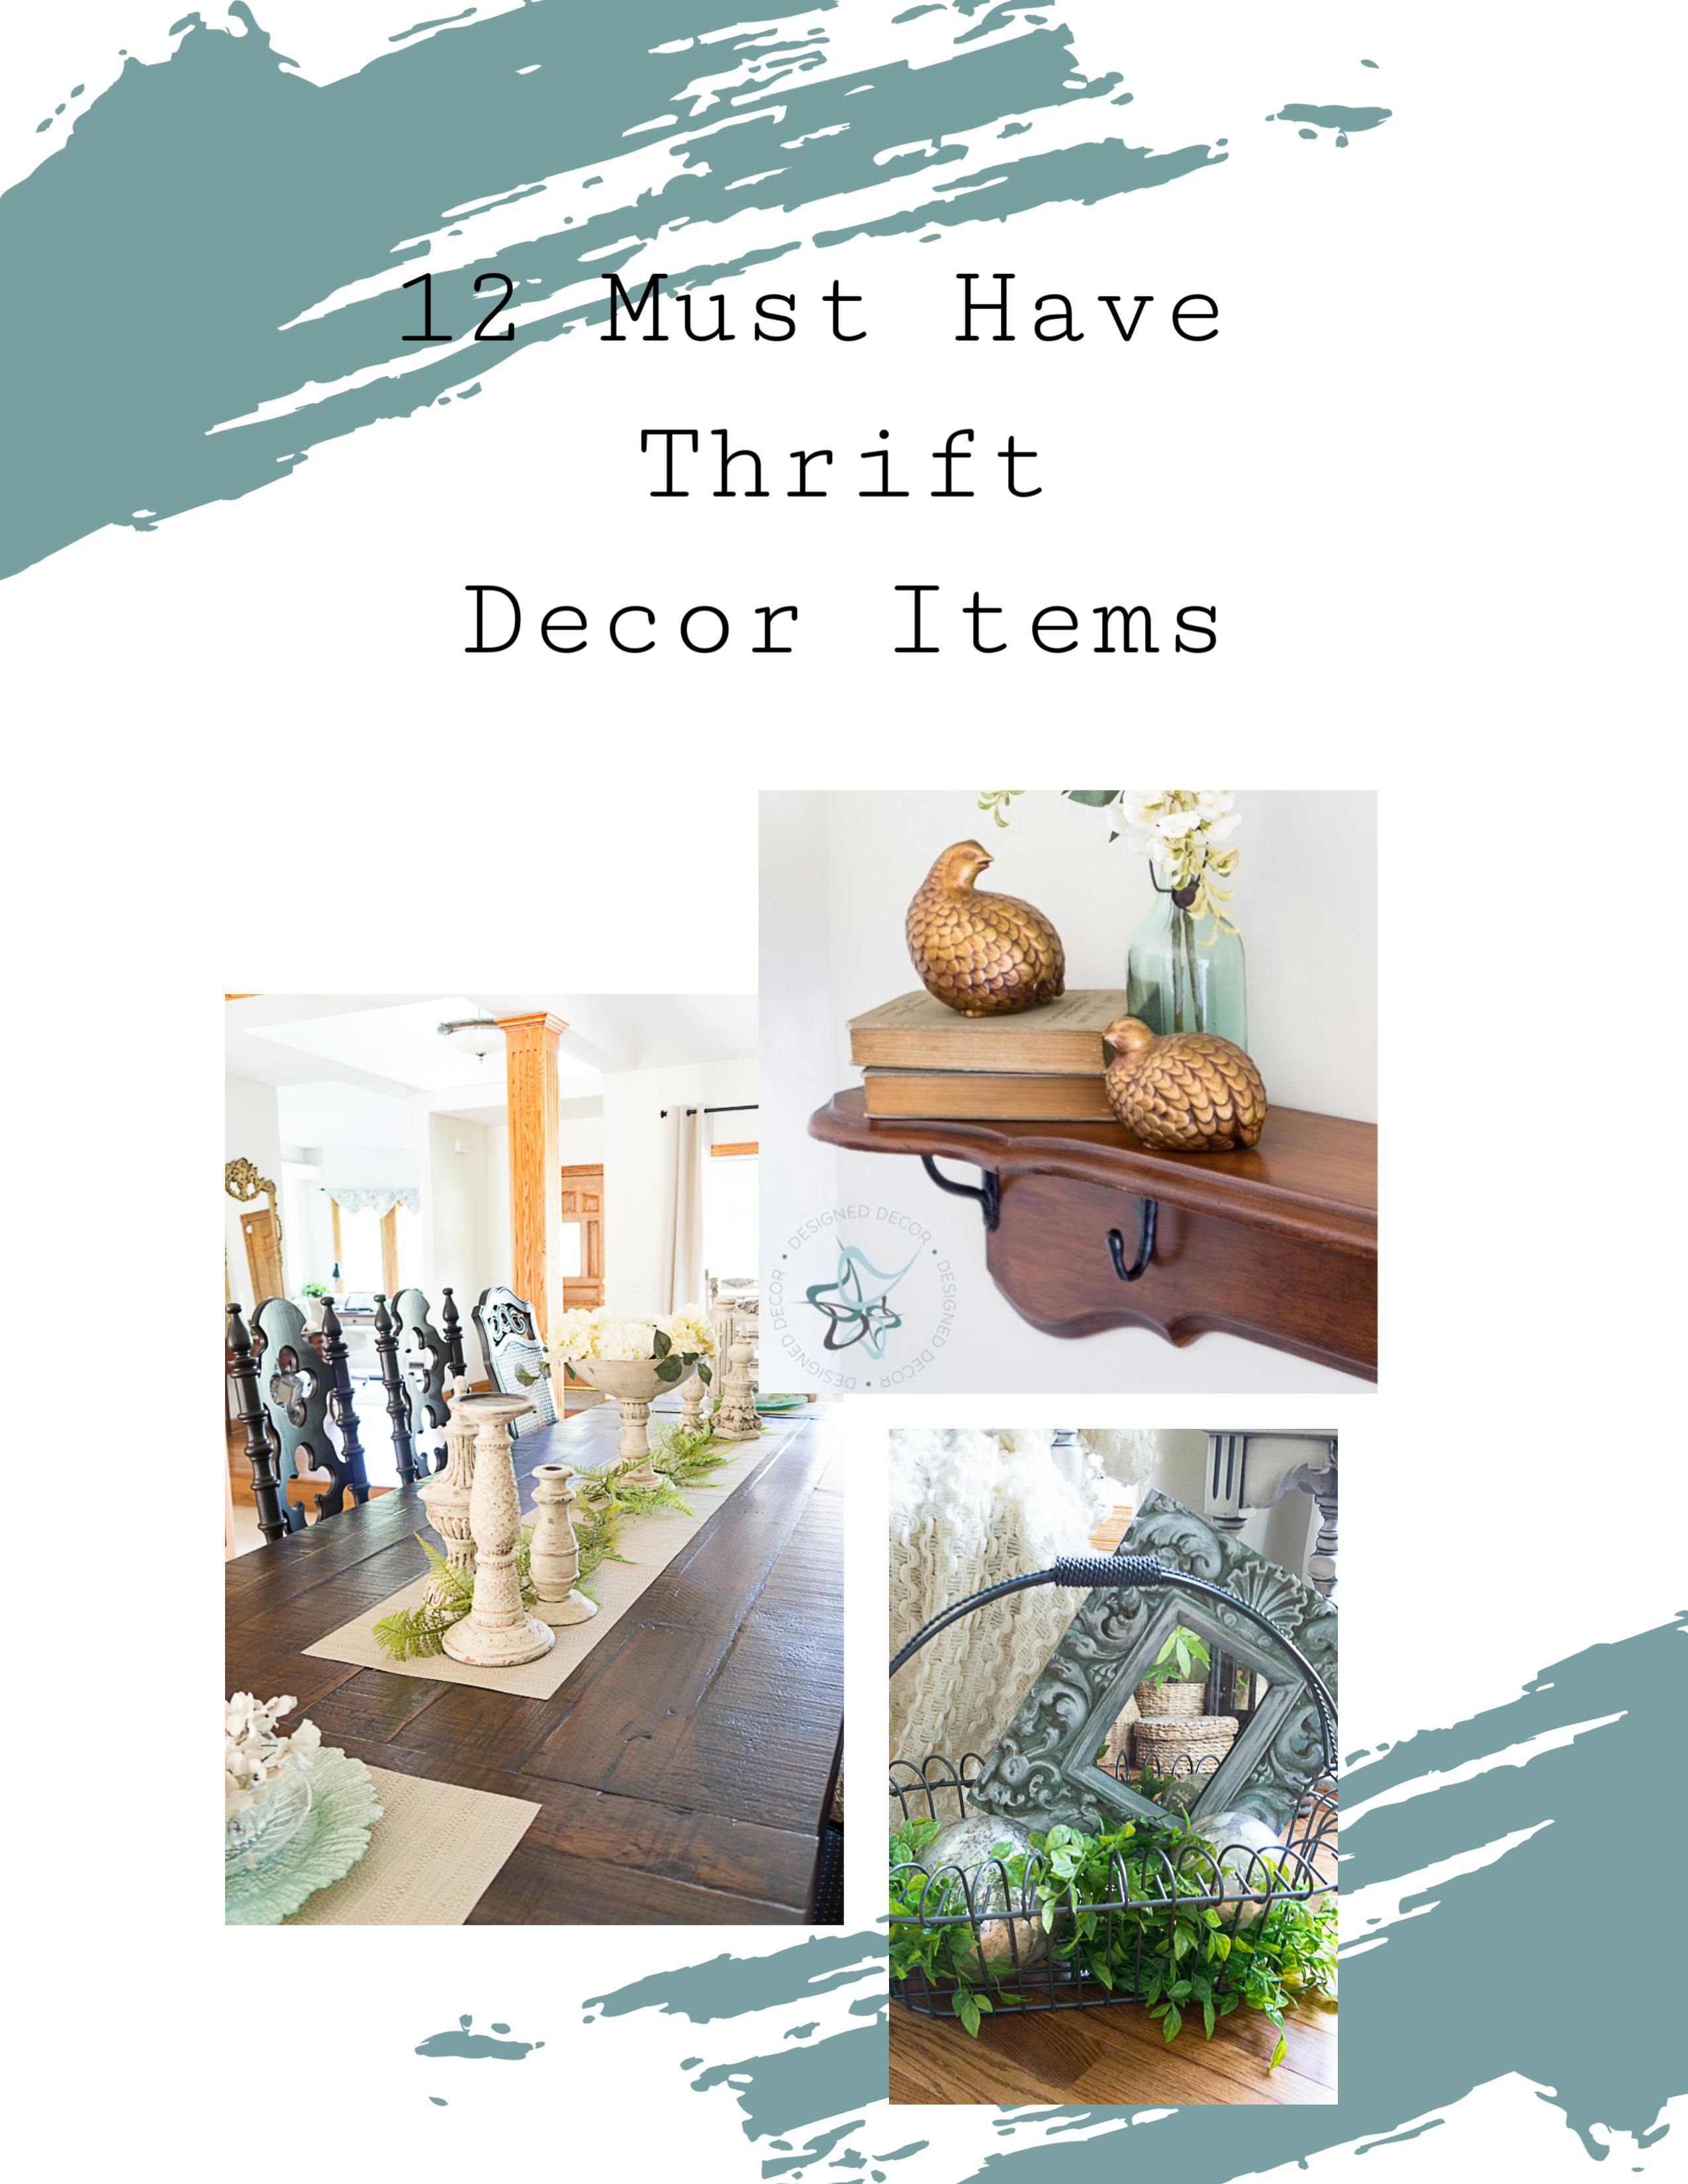 Thrift Store Treasures: Tips For Finding And Refinishing Second Hand Decor